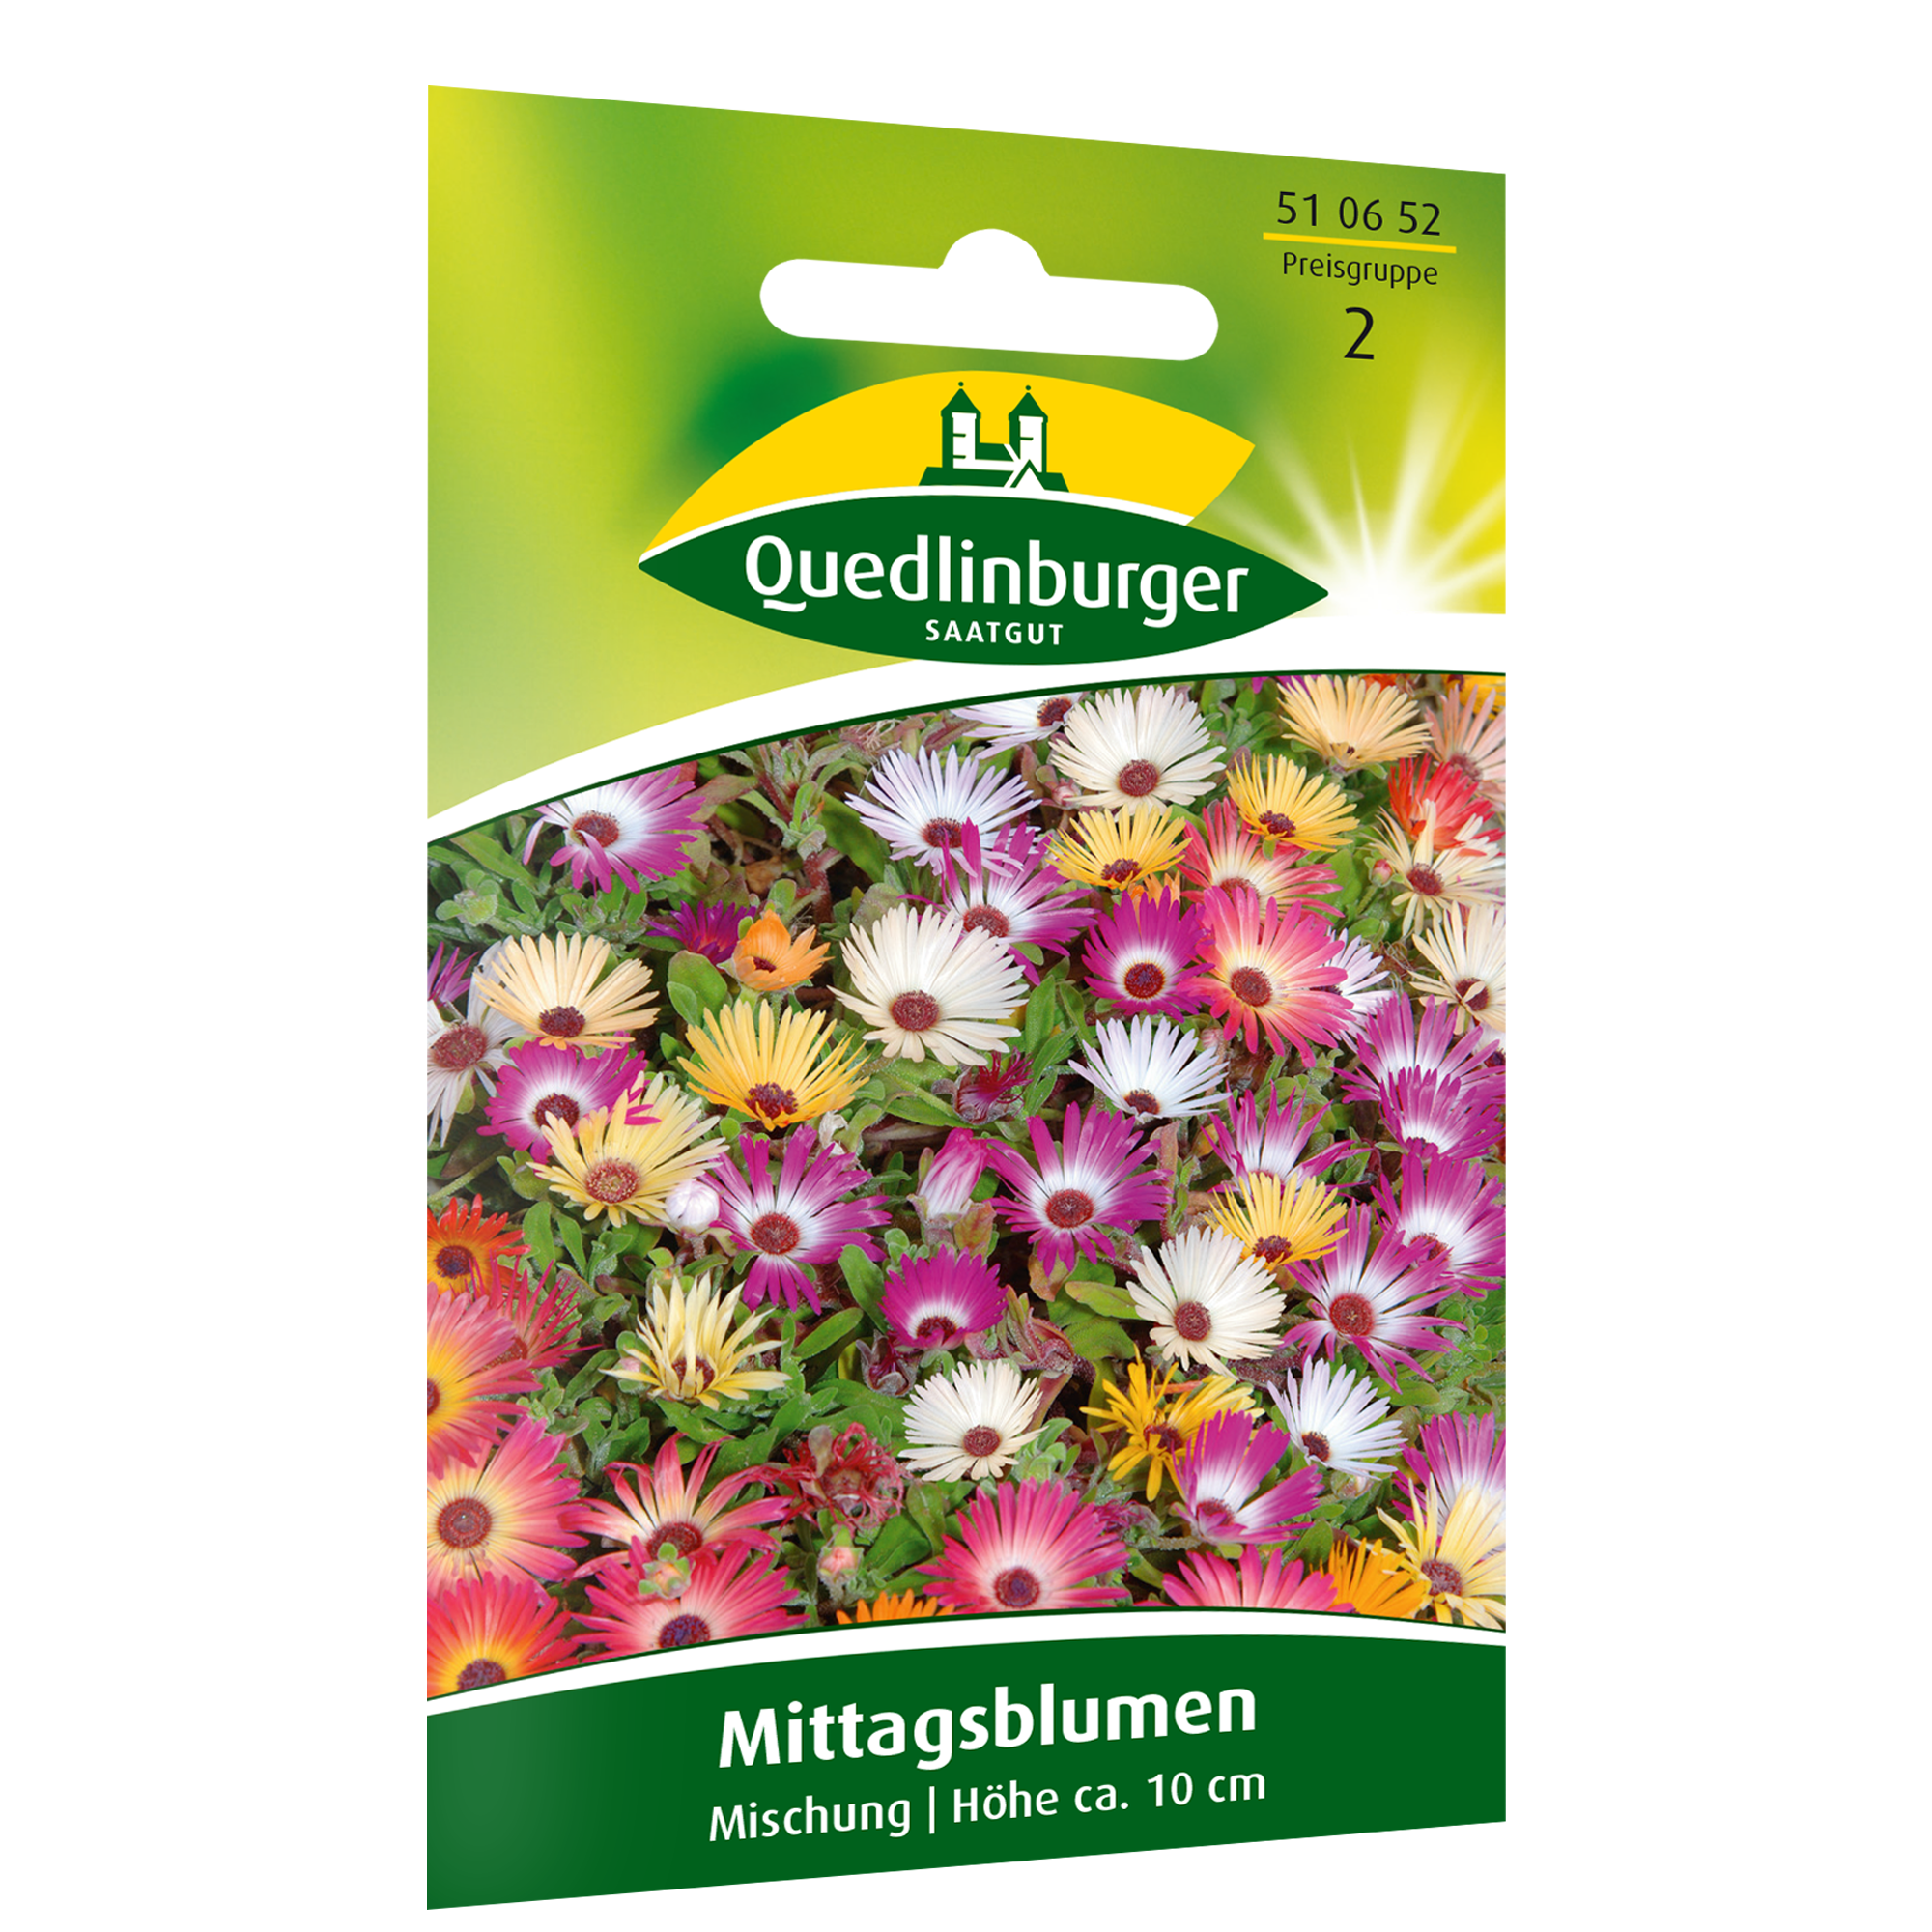 Mittagsblumen Mischung + product picture